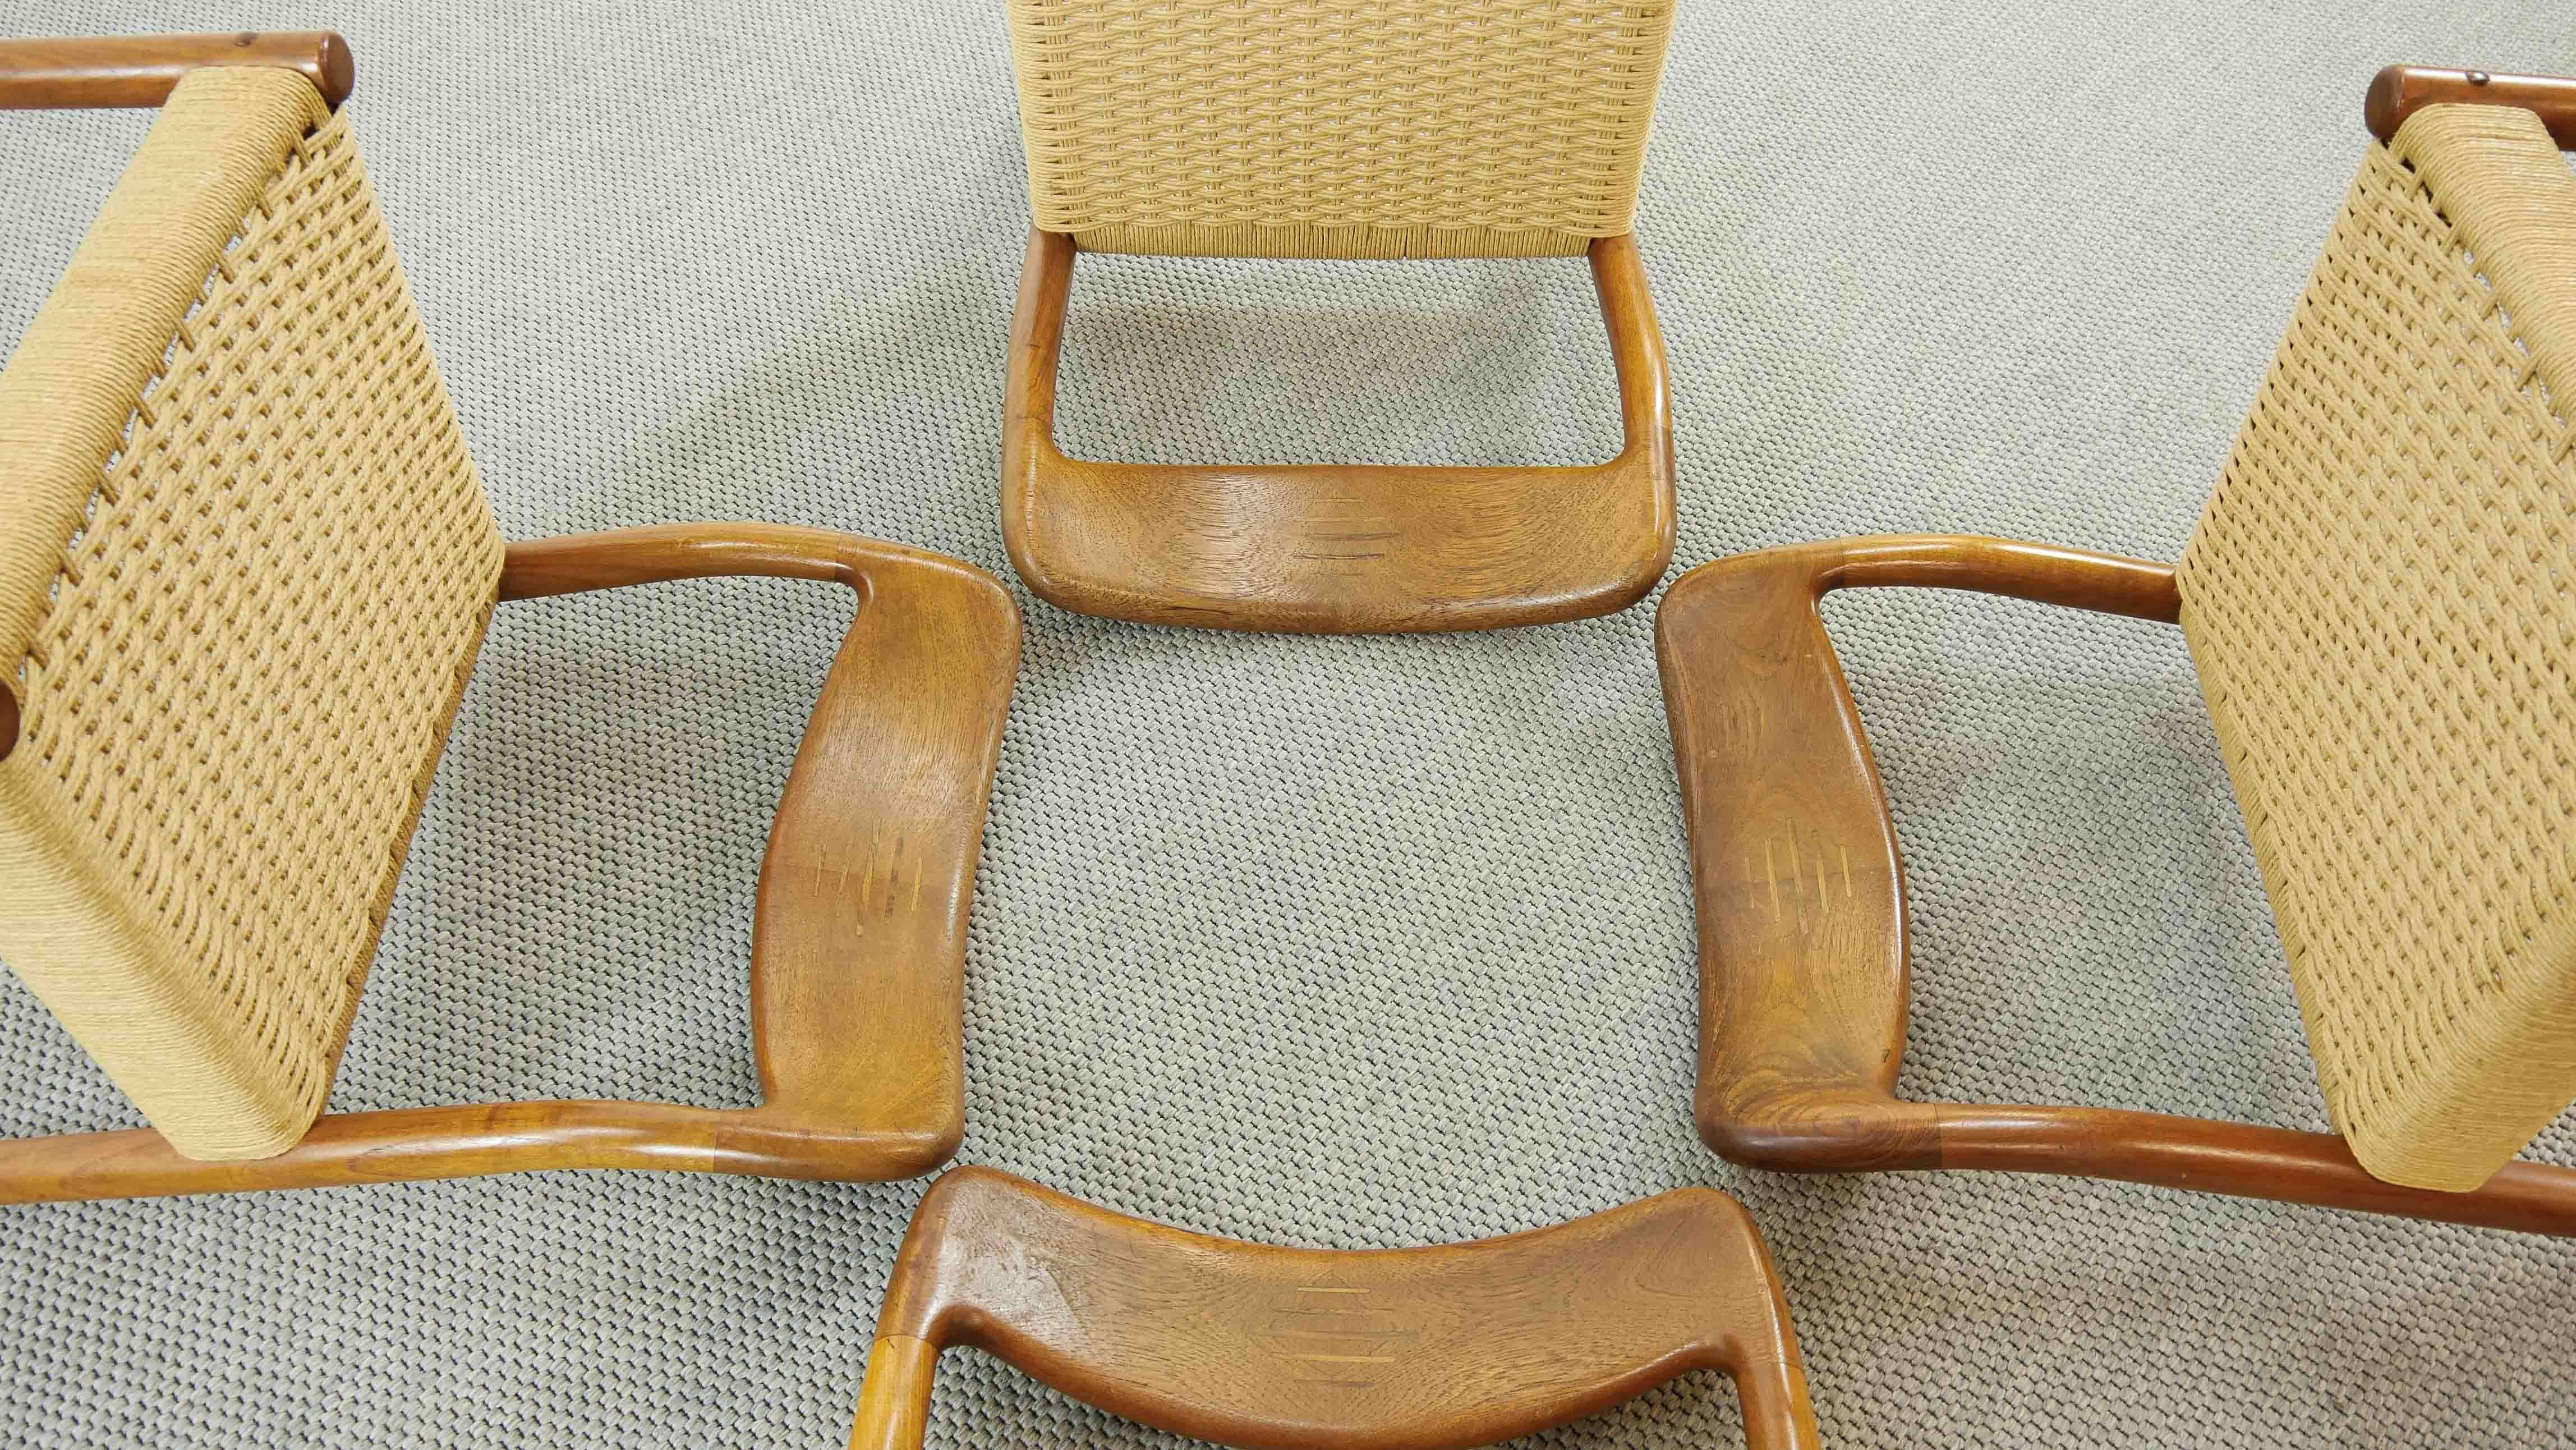 Set of 4 Teak Chairs with Papercord Seat by Johannes Andersen for Uldum, Denmark 10